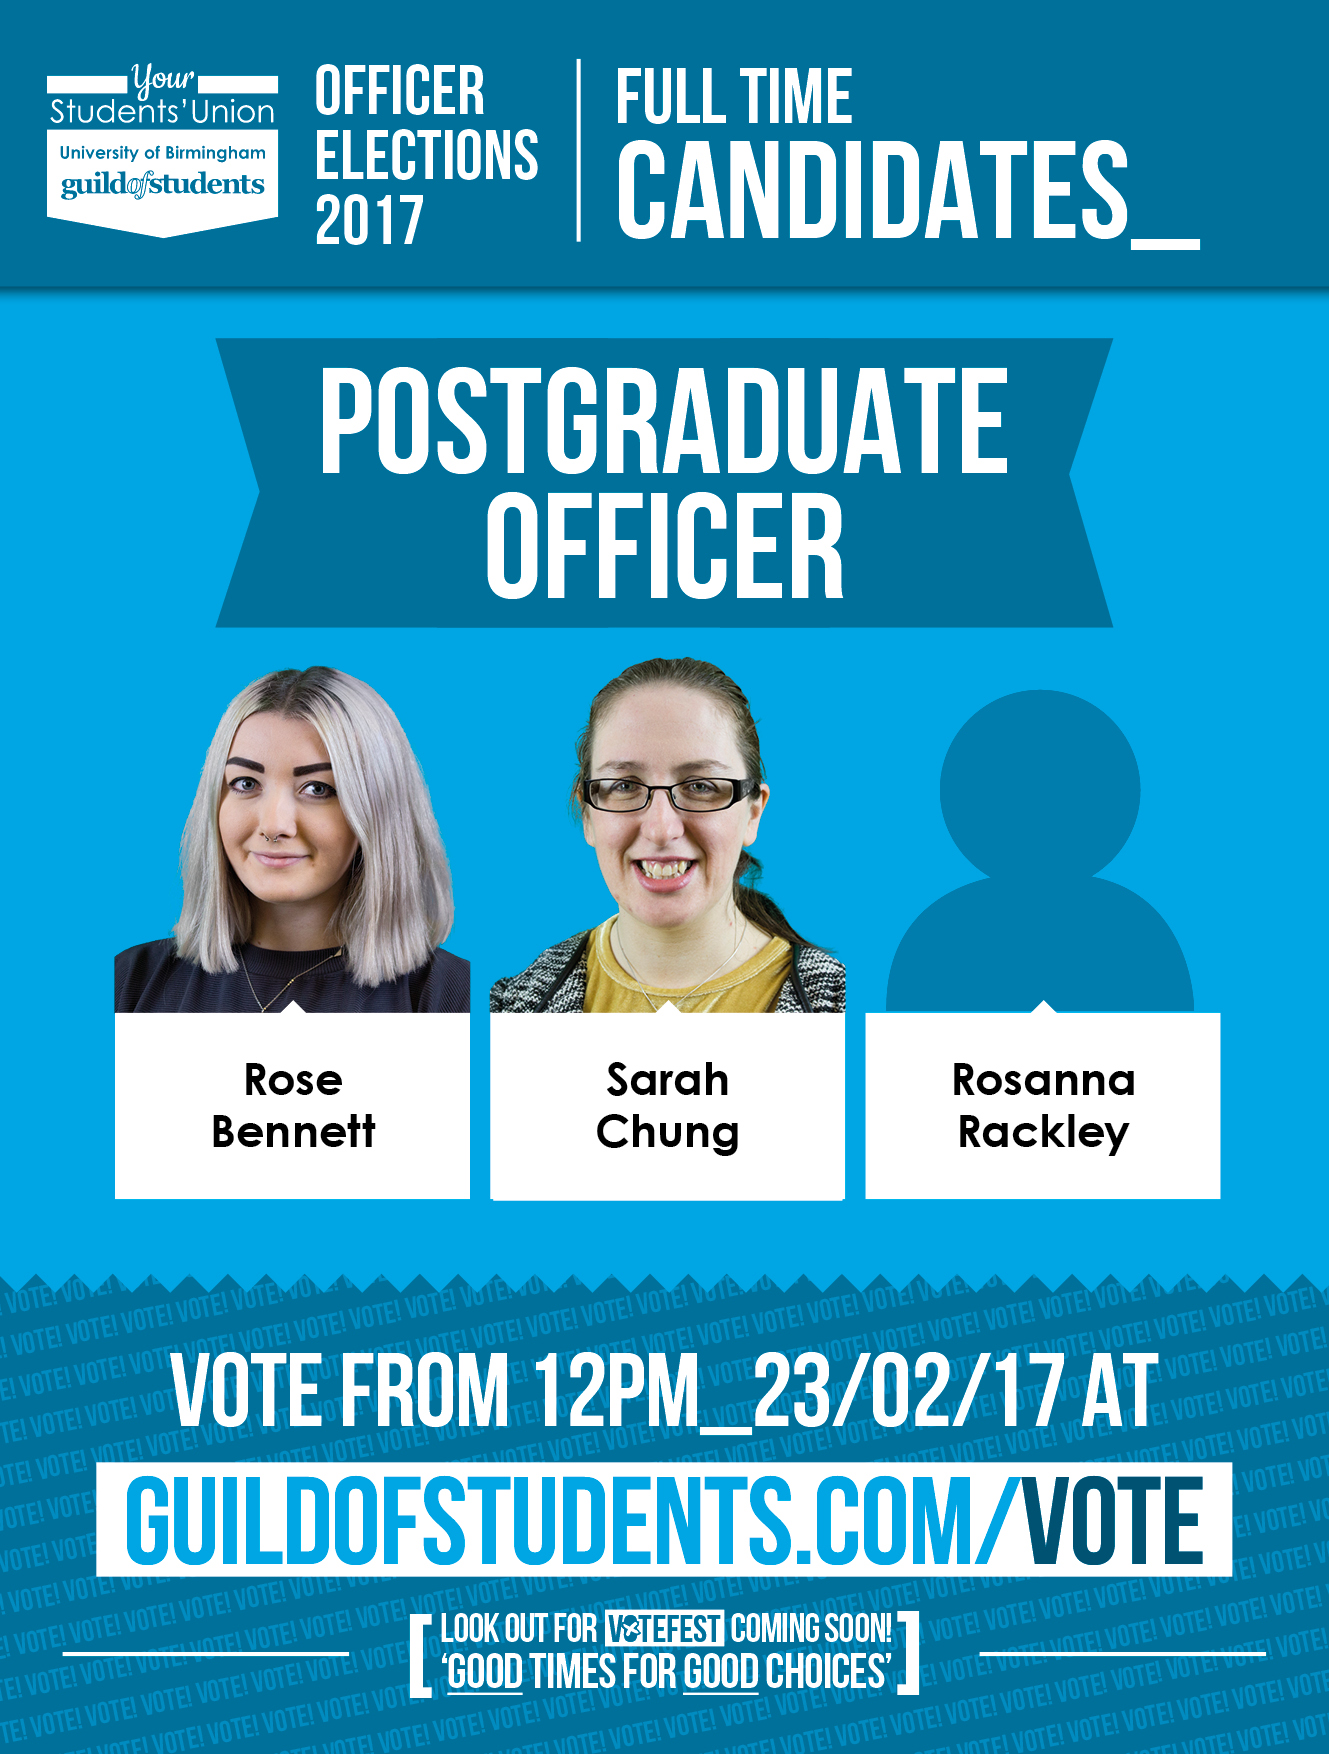 Guild Elections 2017 - Full Time Candidates - Postgraduate Officer